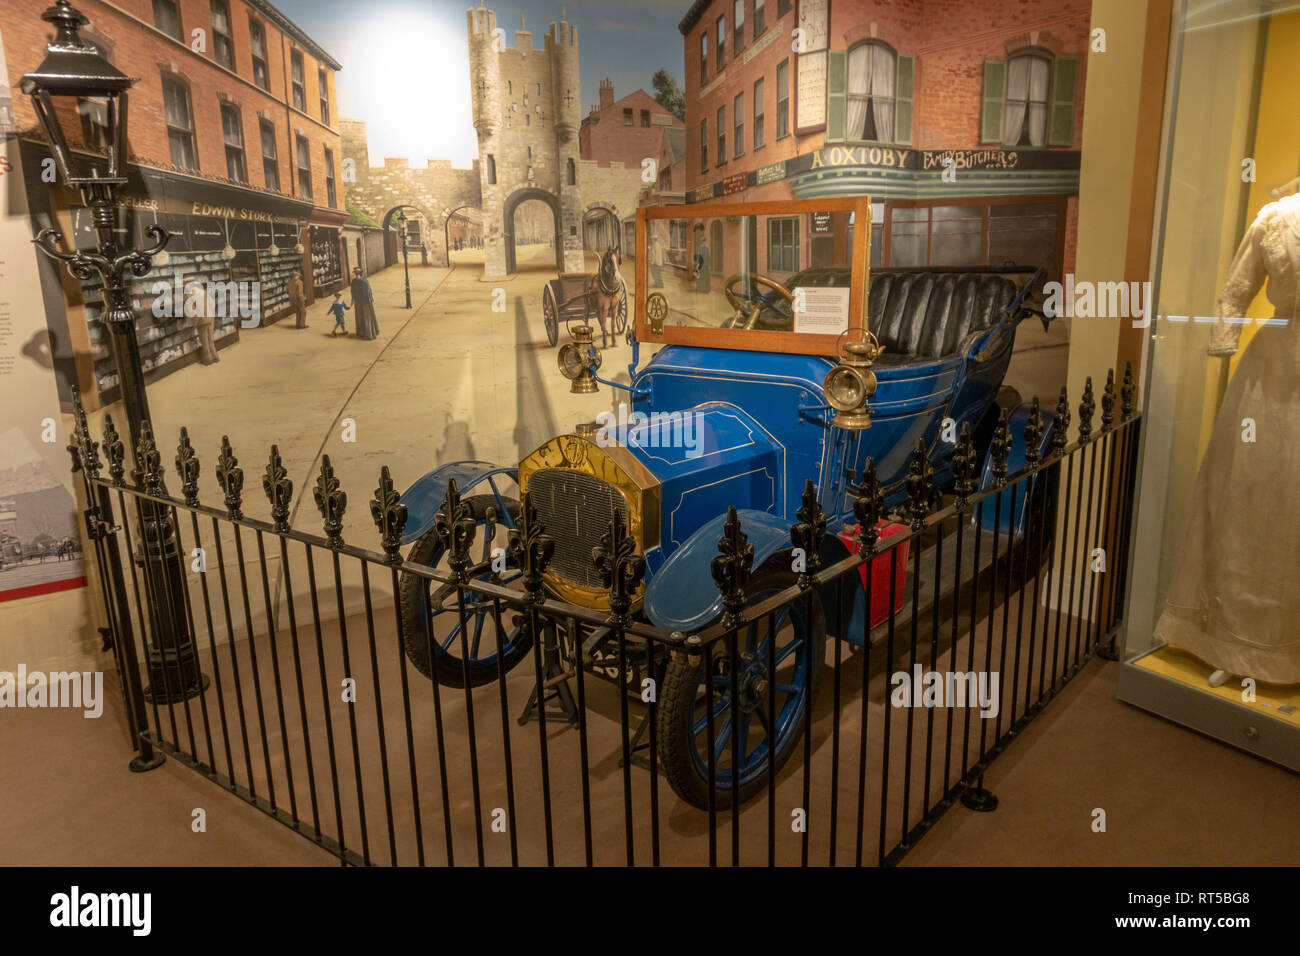 Colibri car (c. 1907) on display in the York Castle Museum, York, Yorkshire, UK. Stock Photo